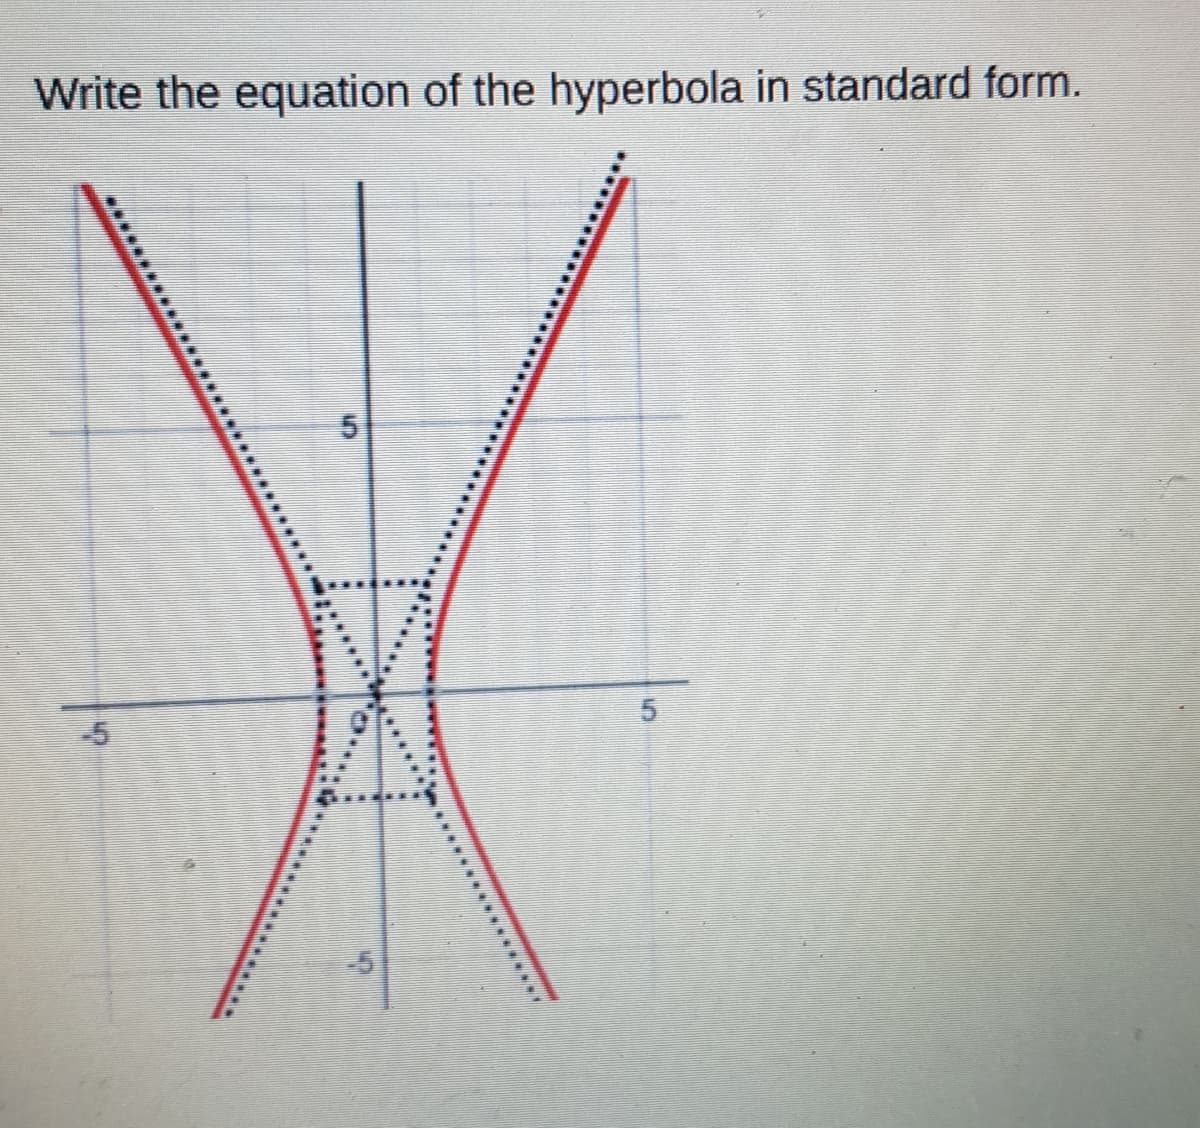 Write the equation of the hyperbola in standard form.
-5
-5
5.
